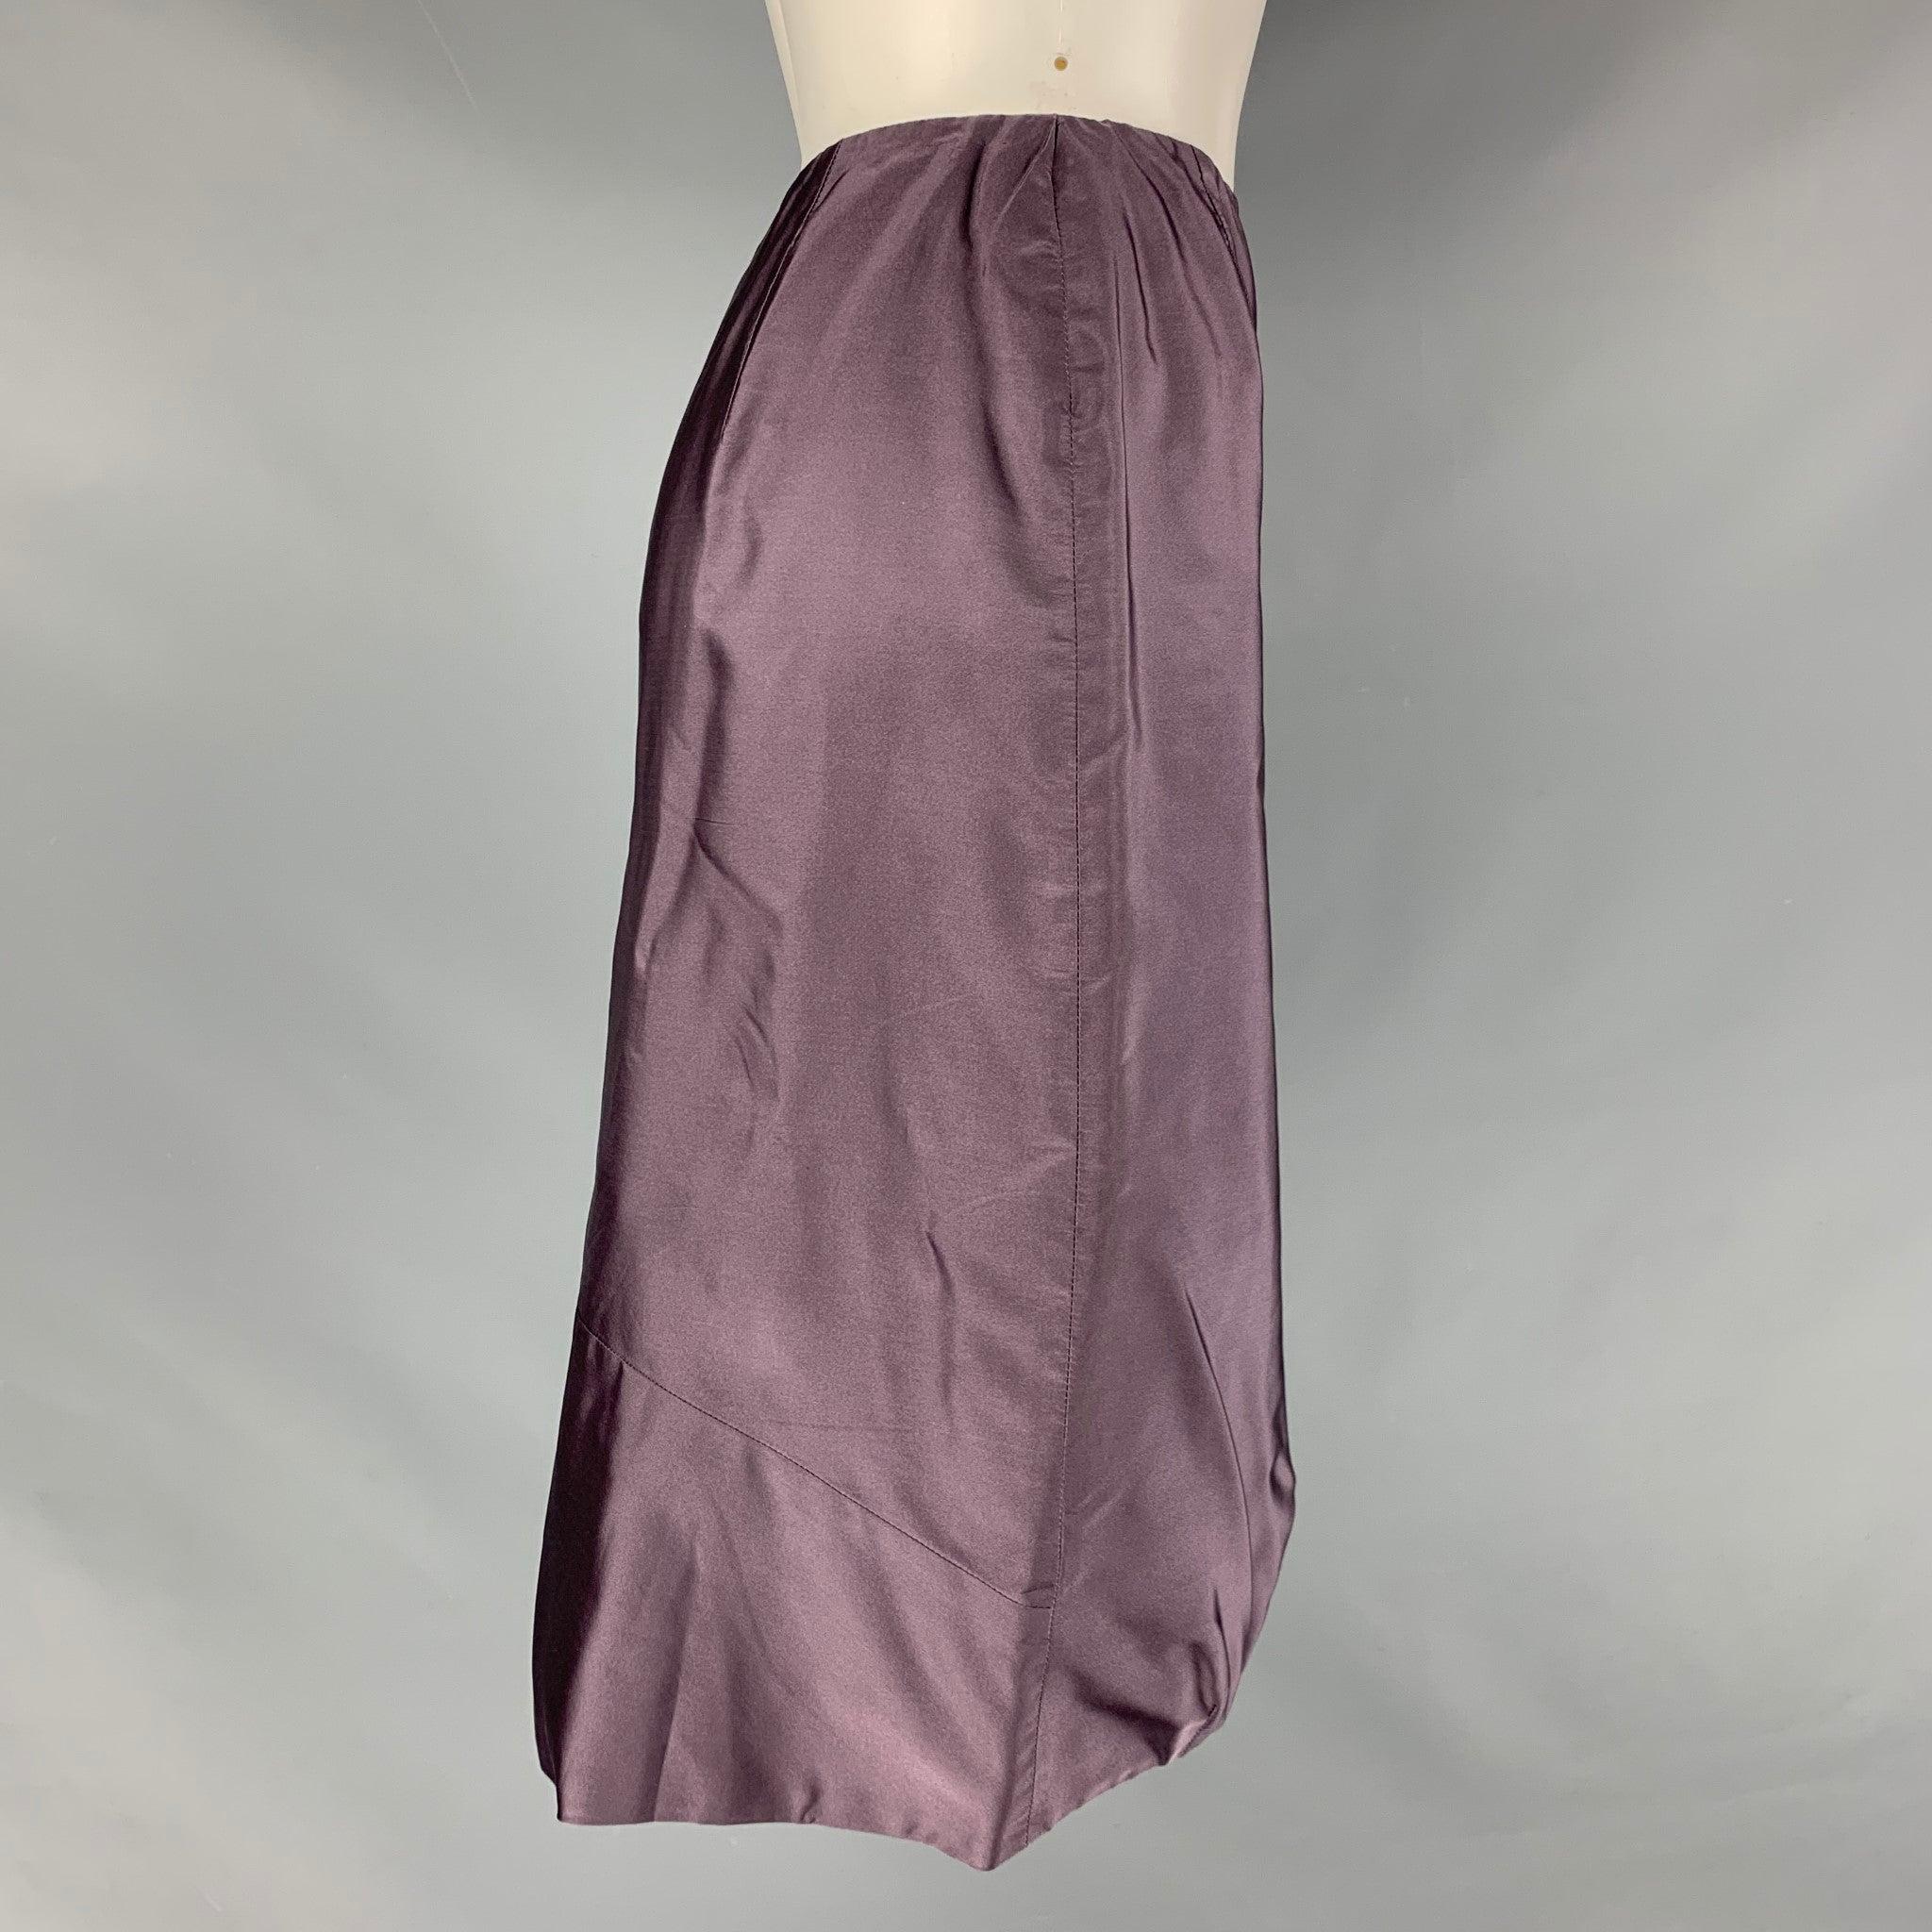 PRADA skirt comes in a lilac silk material featuring a bubble hem, and a side seam zipper closure. Made in Italy.Excellent Pre-Owned Condition. 

Marked:   40 

Measurements: 
  Waist: 24 inches Hip: 35 inches Length: 22 inches  

  
  
 
Reference: